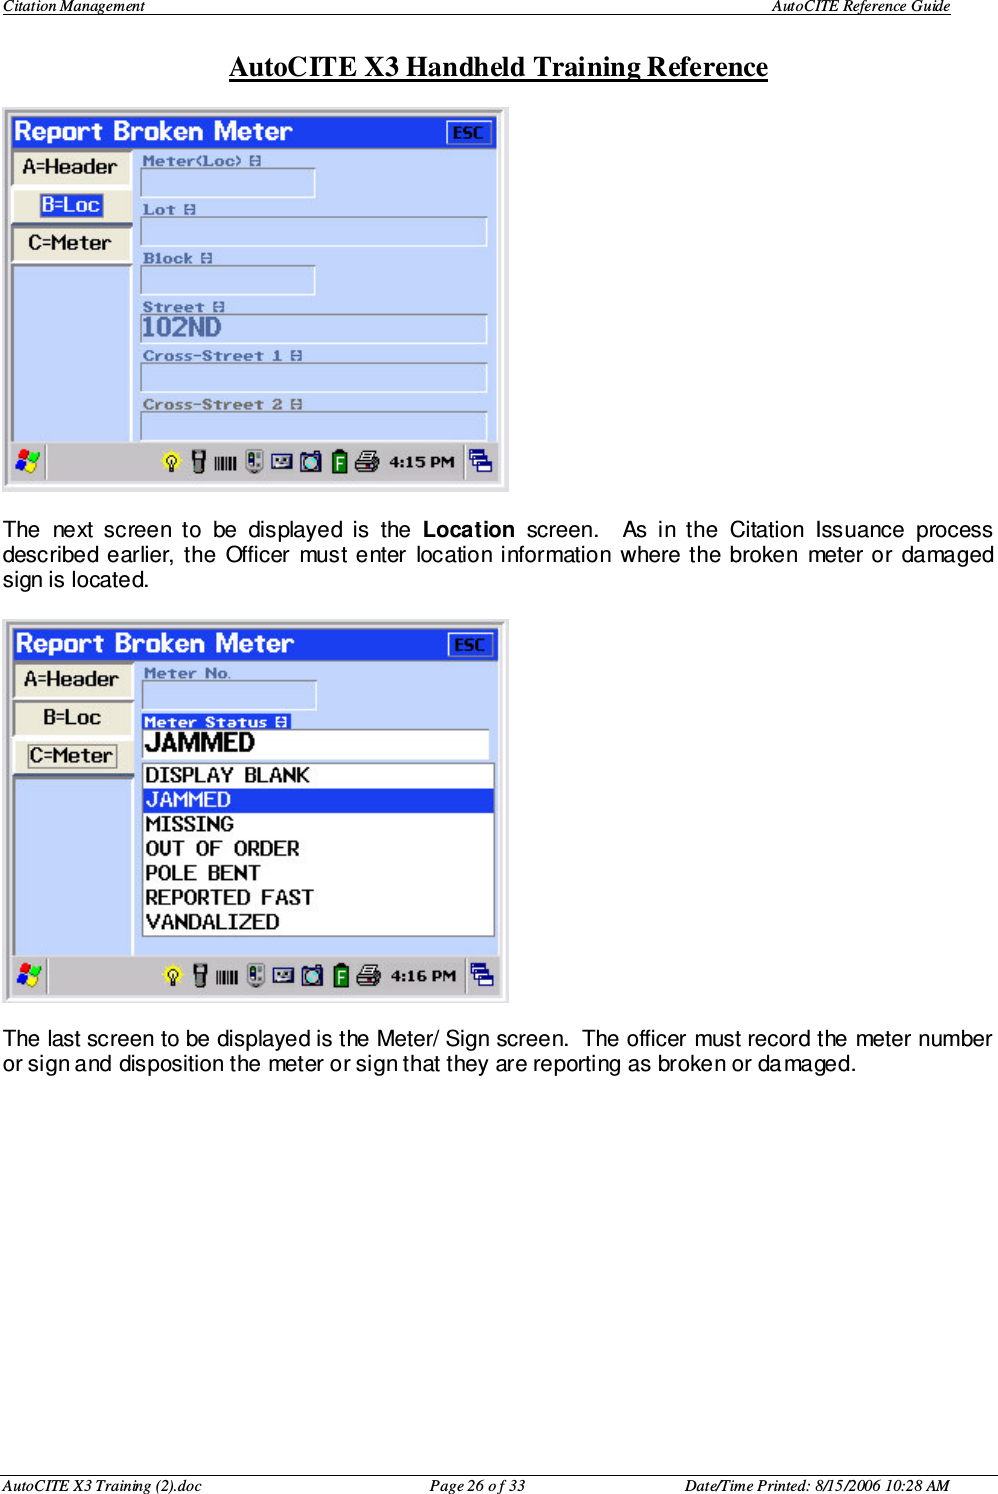 Citation Management    AutoCITE Reference Guide  AutoCITE X3 Handheld Training Reference AutoCITE X3 Training (2).doc  Page 26 o f 33  Date/Time Printed: 8/15/2006 10:28 AM  The  next  screen  to  be  displayed  is  the  Location  screen.    As  in  the  Citation  Issuance  process described  earlier,  the  Officer  must enter  location information  where  the  broken  meter  or  damaged sign is located.    The last screen to be displayed is the Meter/ Sign screen.  The officer must record the meter number or sign and disposition the meter or sign that they are reporting as broken or damaged.               